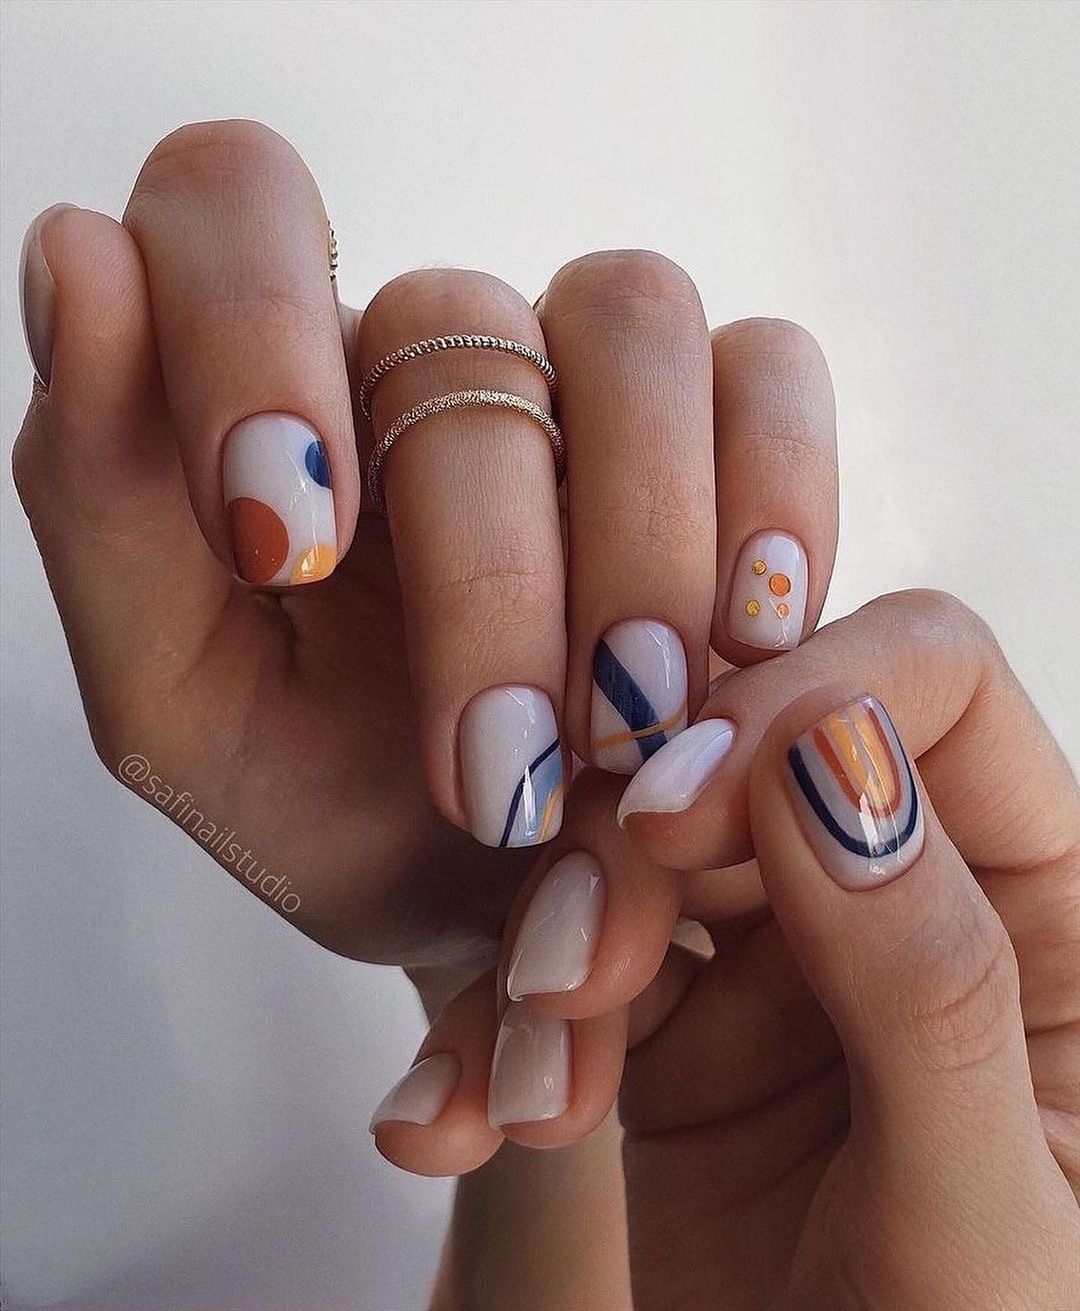 30 Gorgeous Square Nail Designs For 2021 images 7